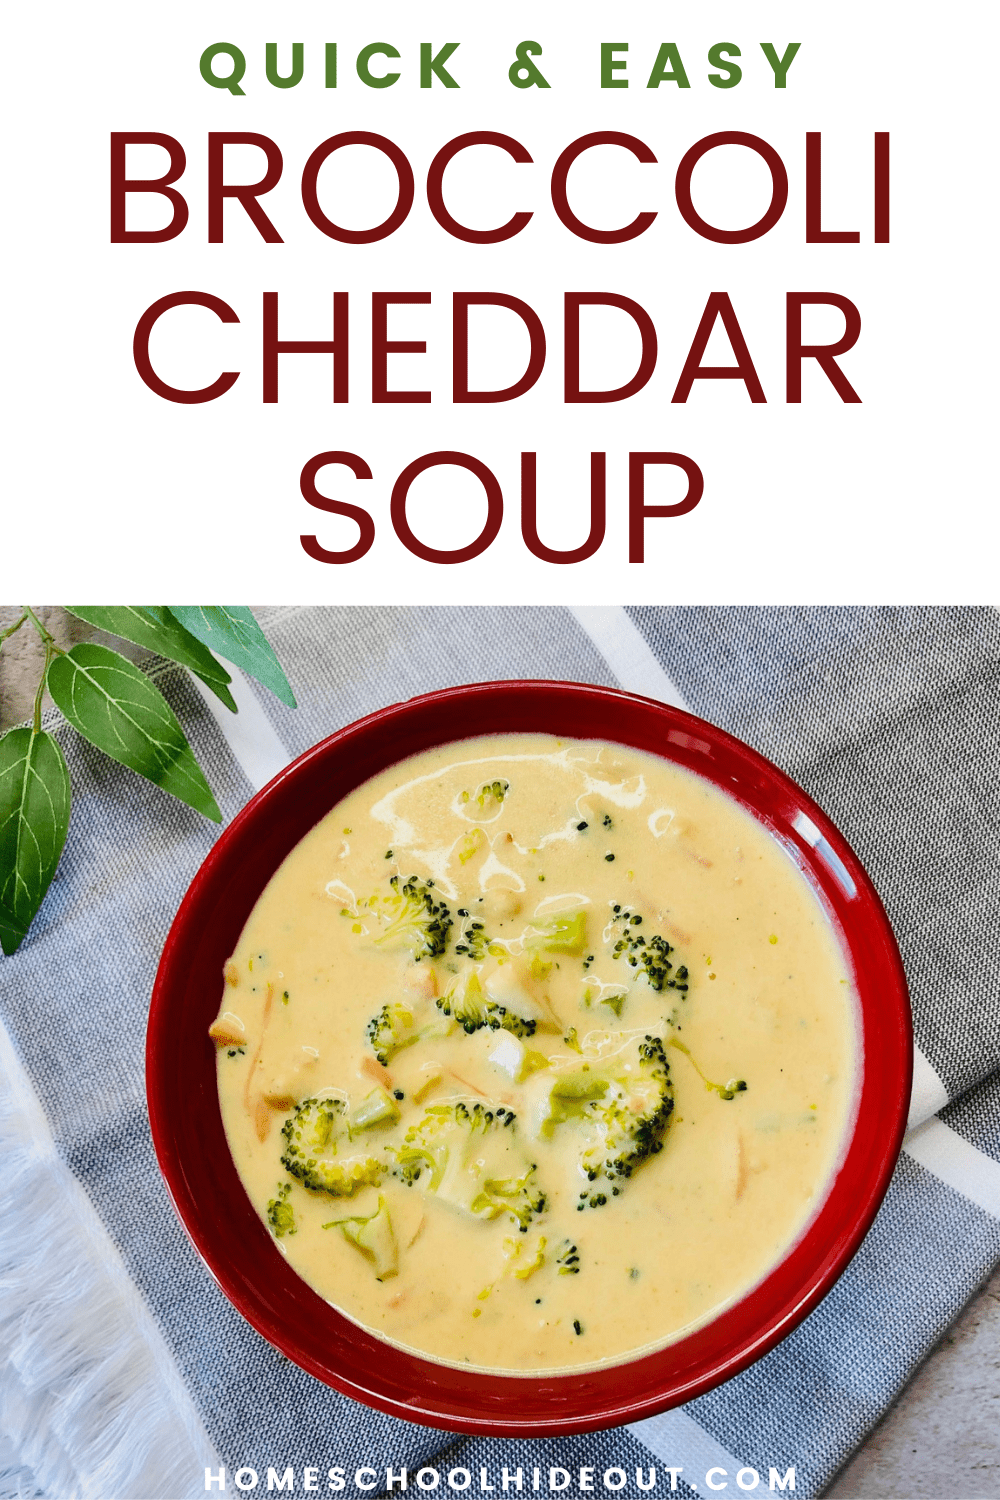 My whole family loves this easy broccoli cheddar soup and it is PERFECT for busy weeknights!